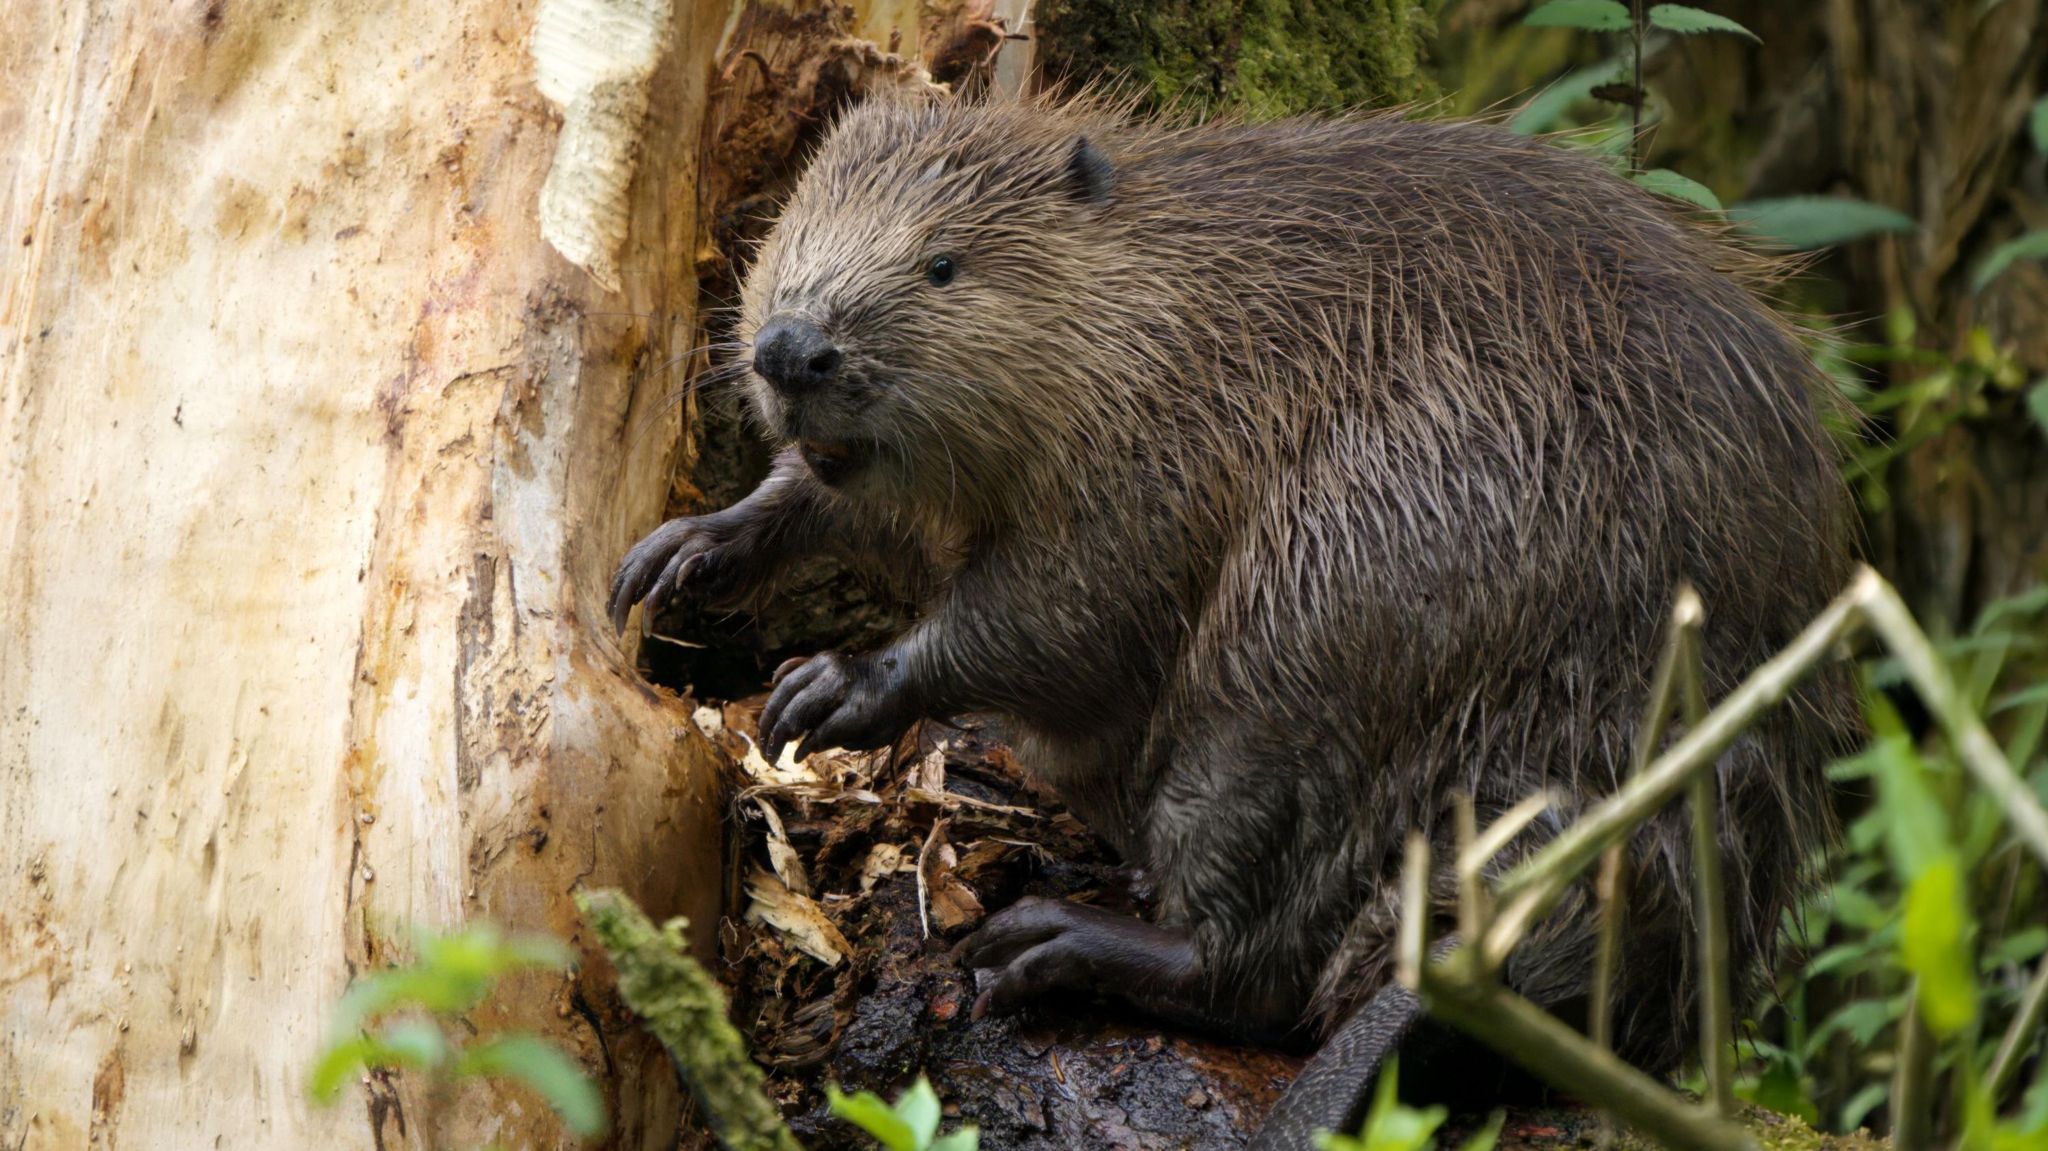 A beaver sat near a tree with grass, mud and leaves near them